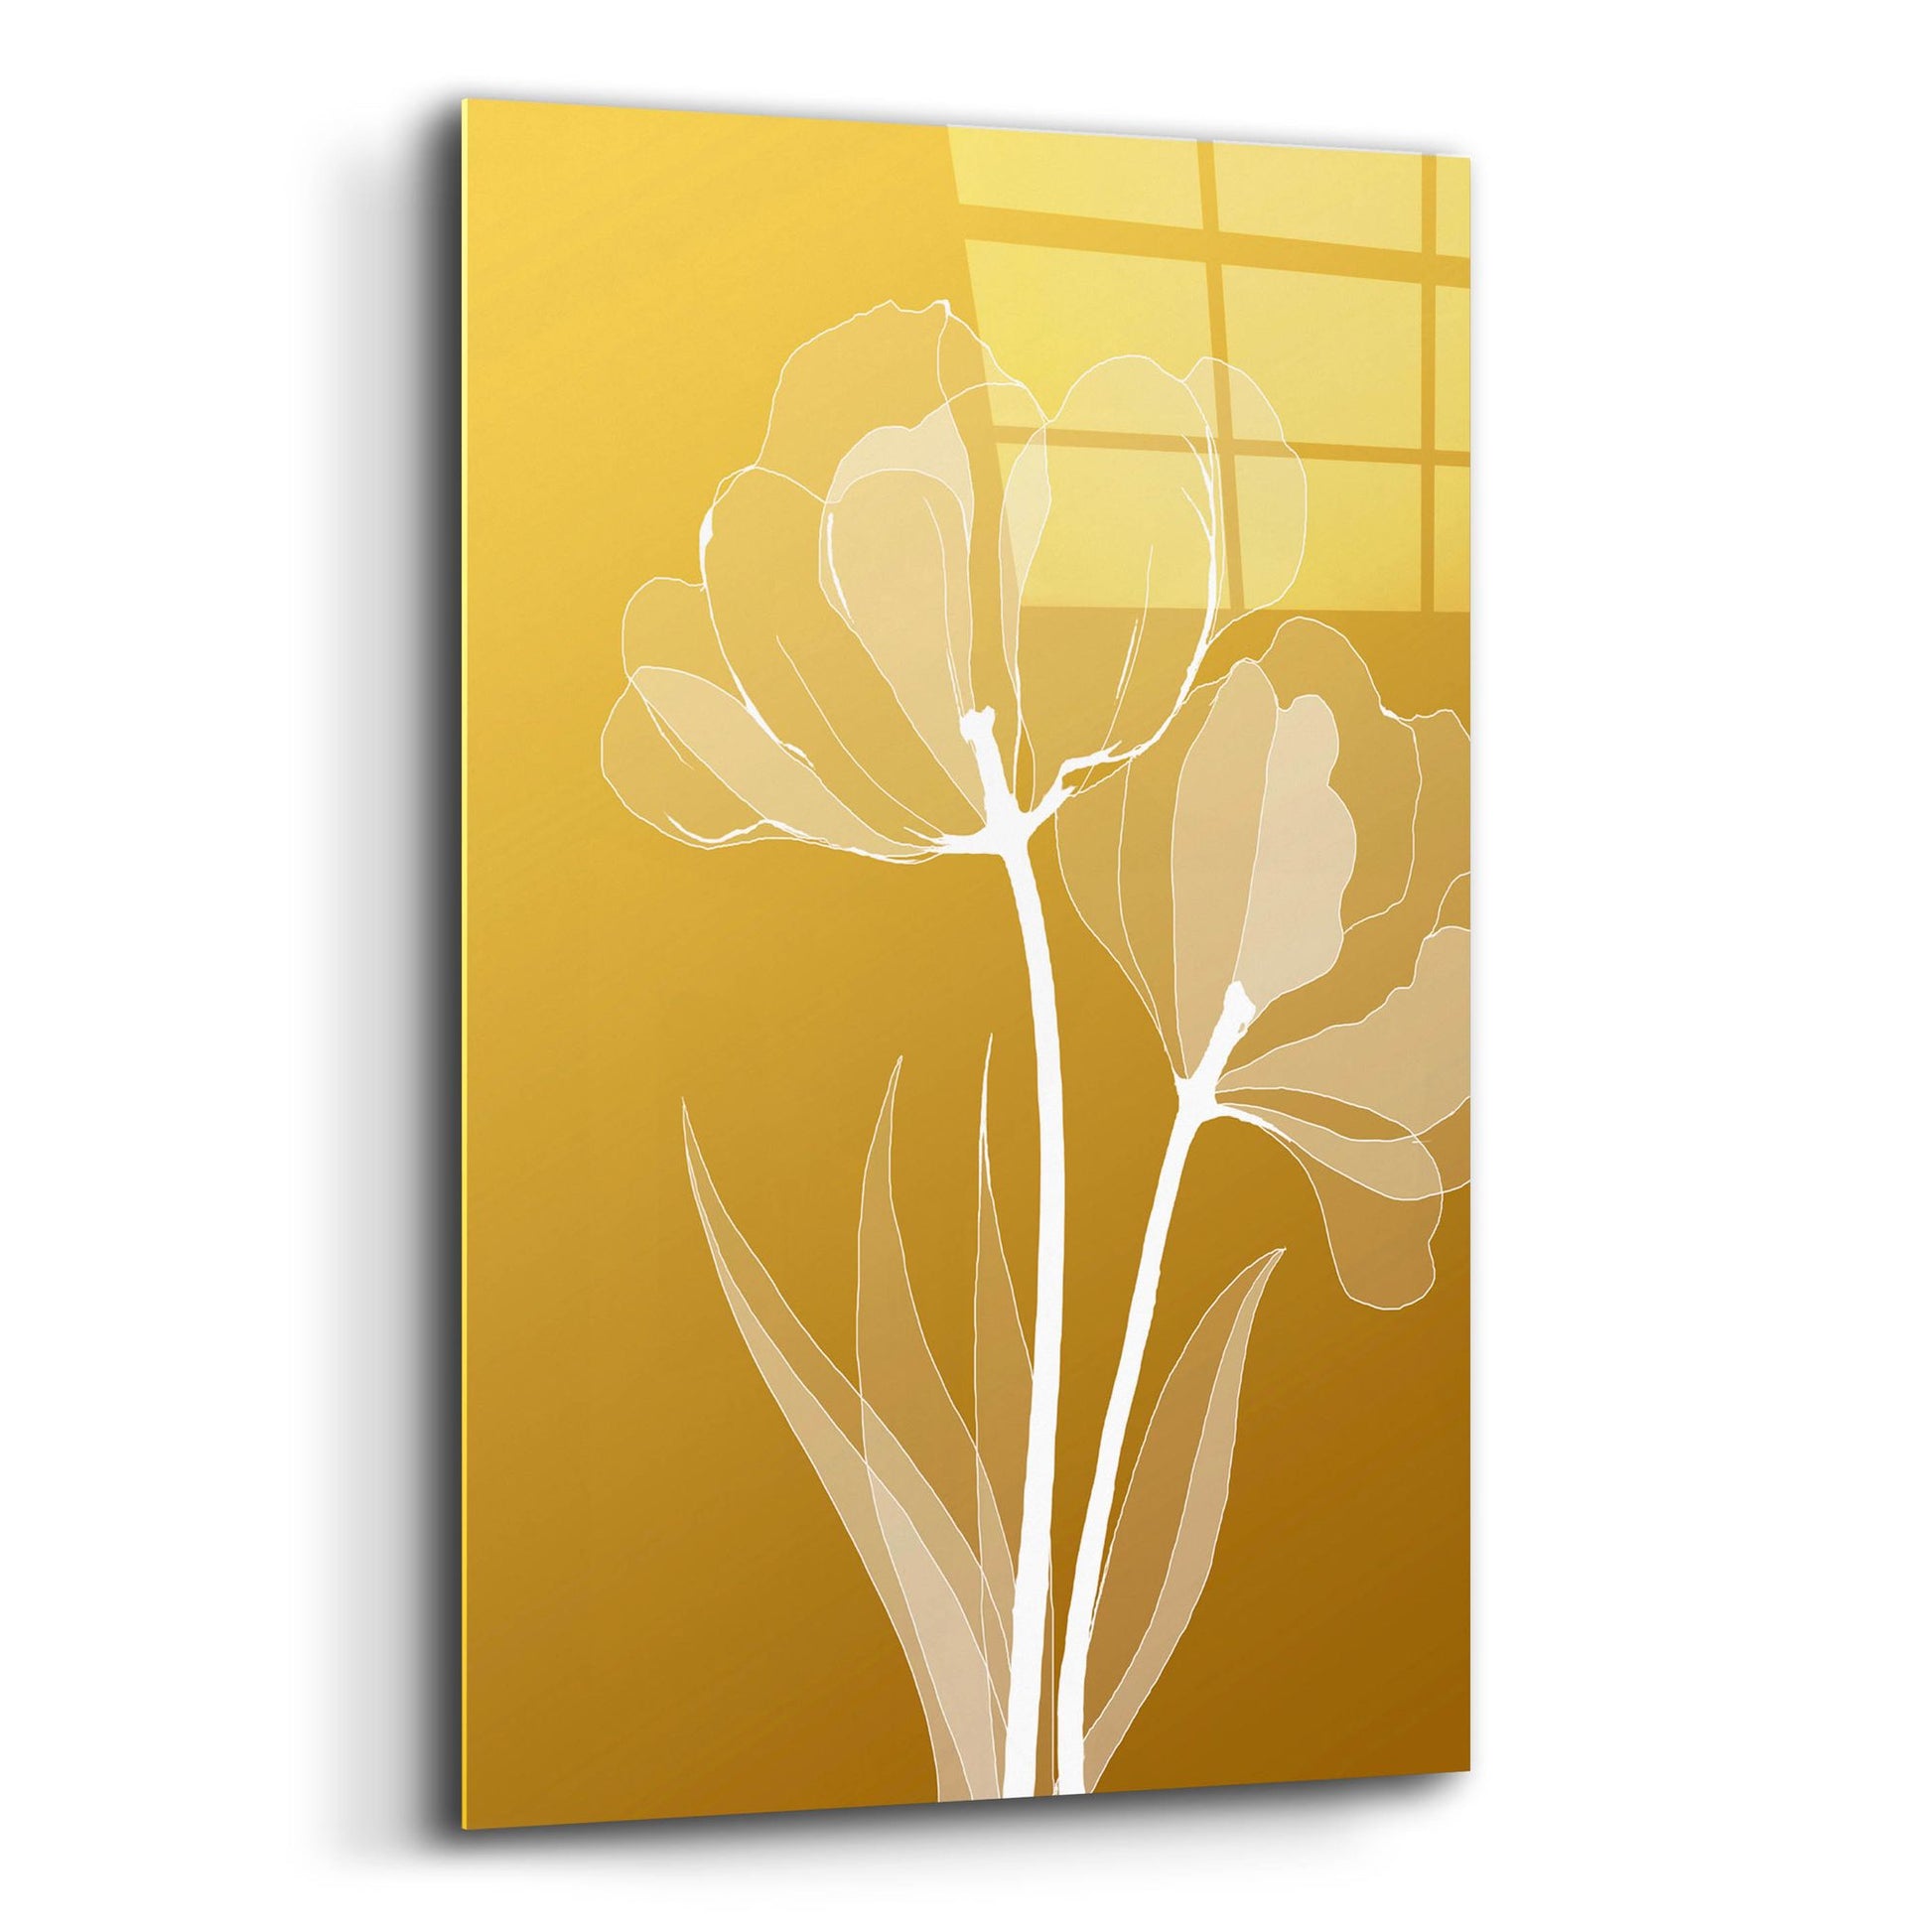 Epic Art 'Floral 6' by Graphinc, Acrylic Glass Wall Art,12x16